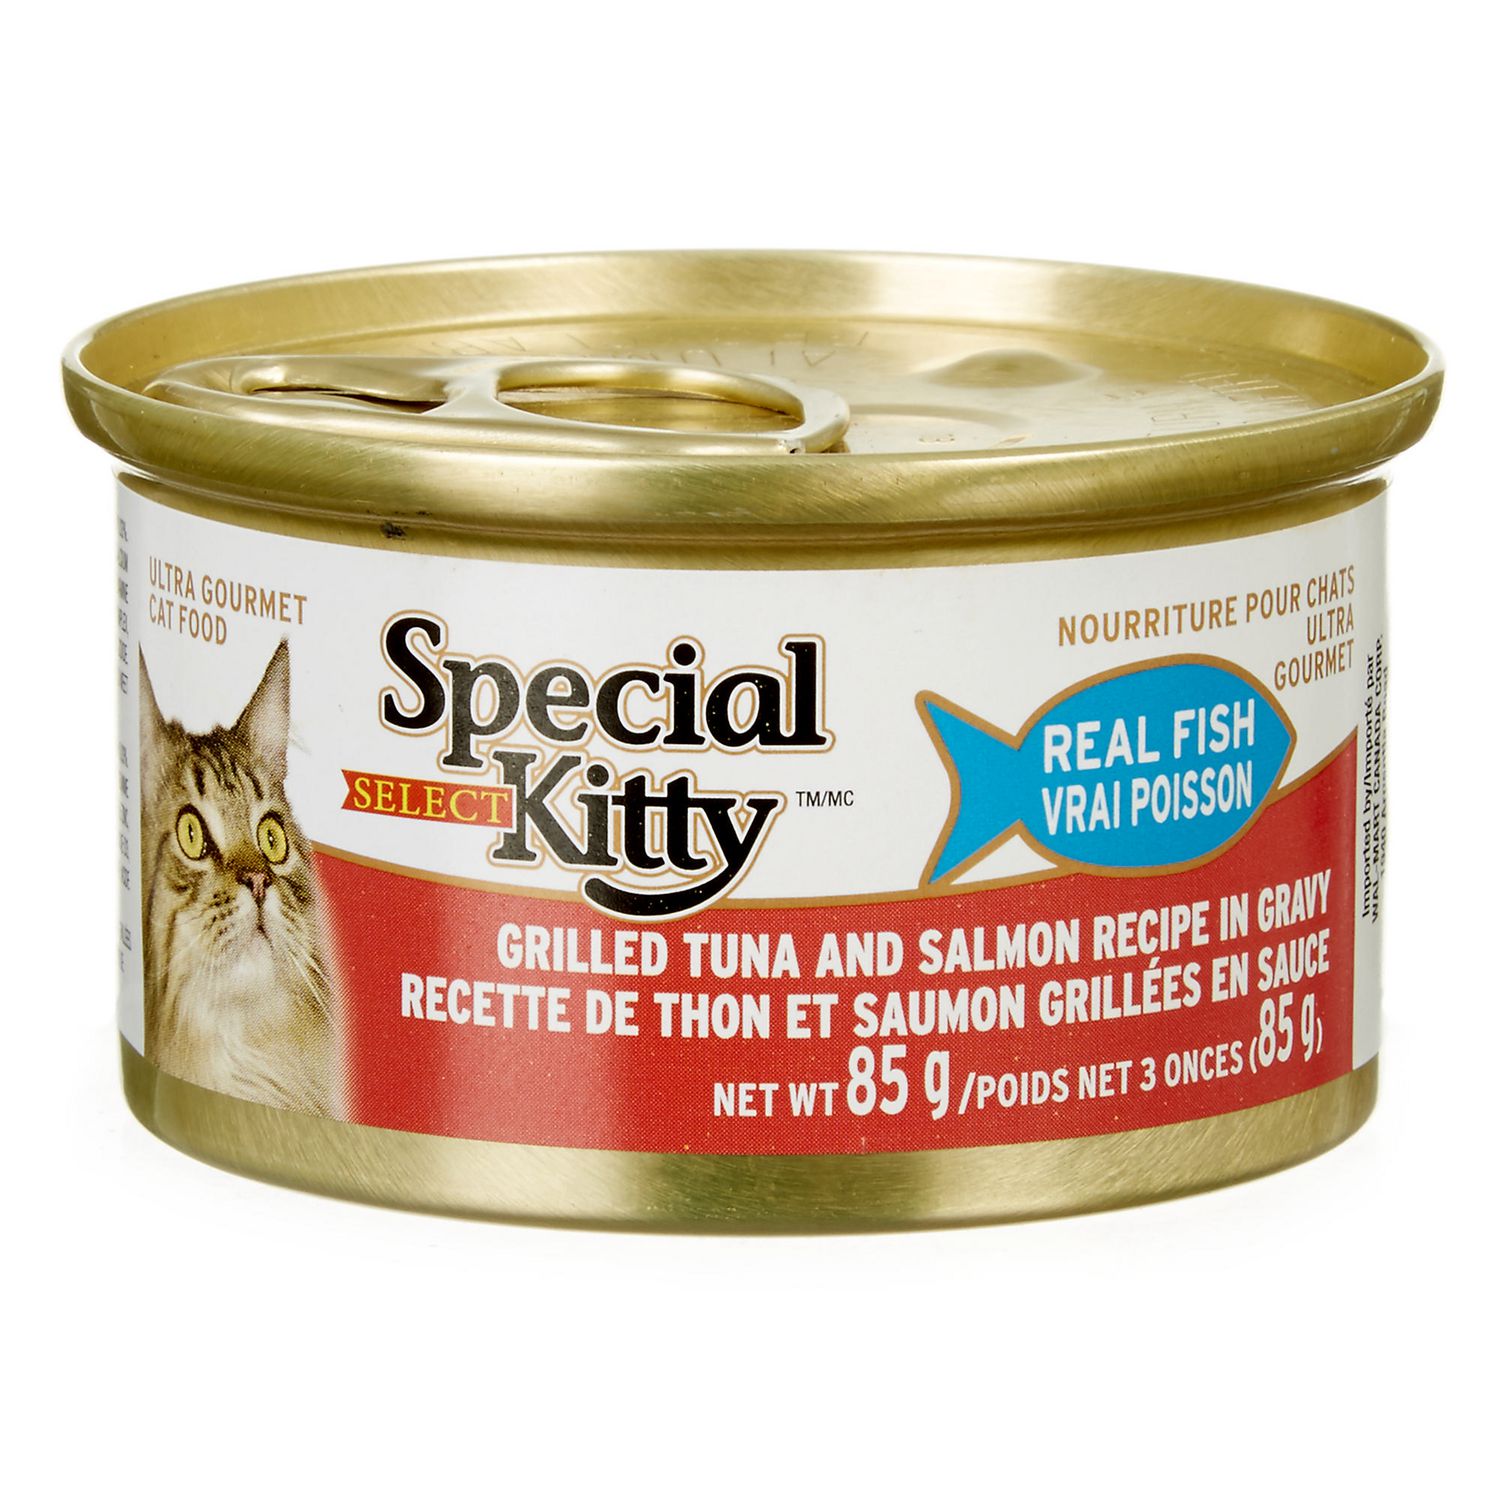 Special Kitty Select Ultra Gourmet Cat Food | Walmart Canada